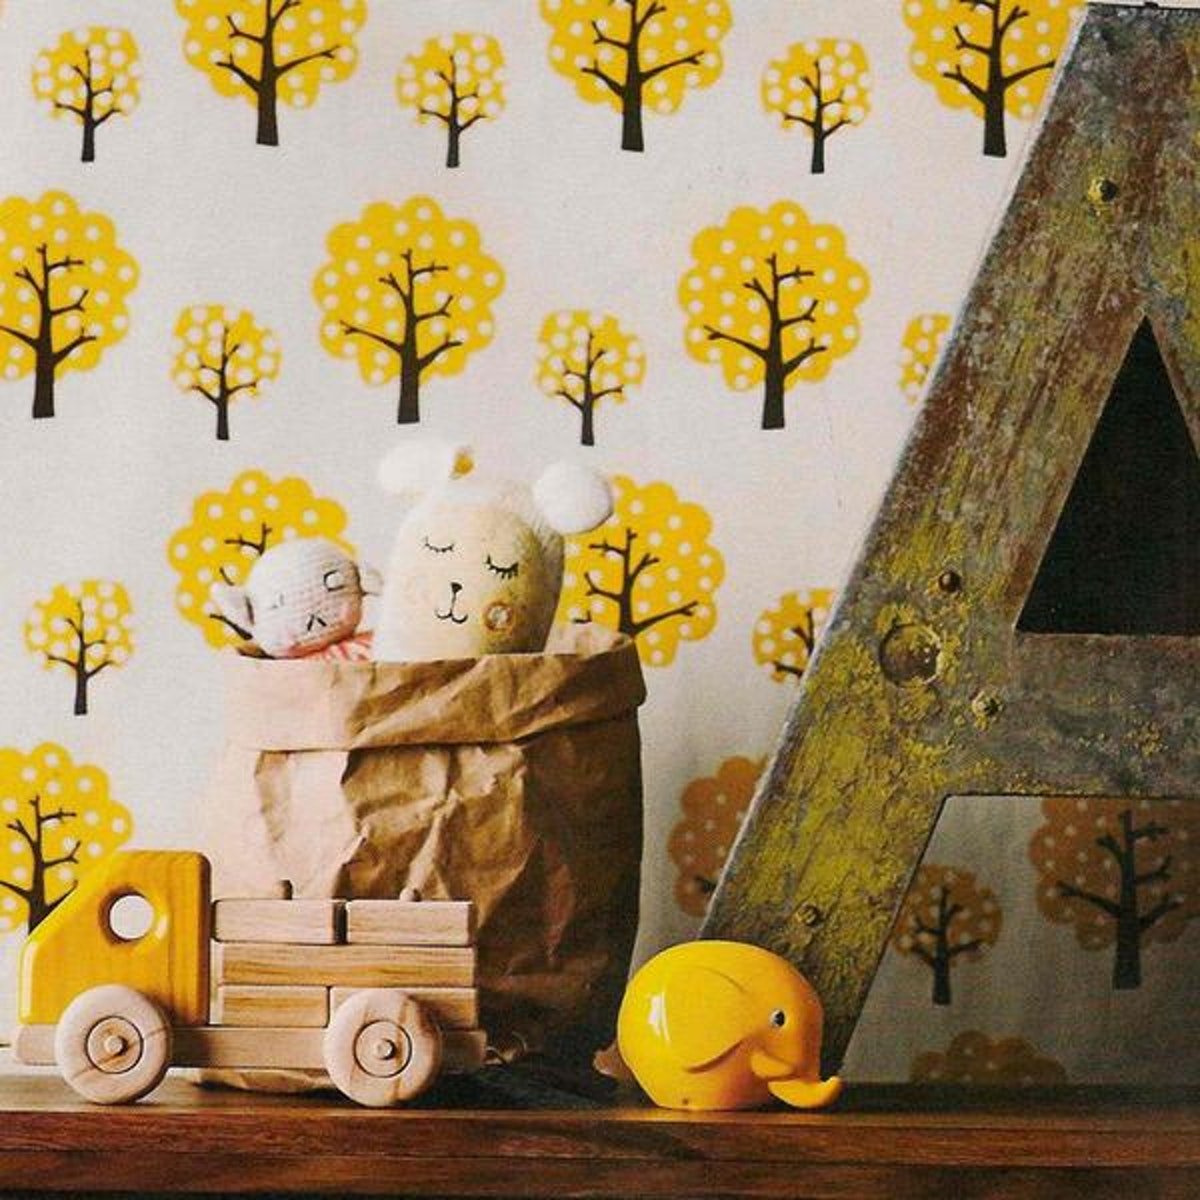 A wooden shelf is shown in front of a wall papered in wallpaper with yellow trees. On the shelf is a washable paper bag in tan in the medium size, containing two soft toys. In front of the paper bag is a wooden truck toy and a small yellow elephant toy. Next to the paper bag is a large wooden A letter. 